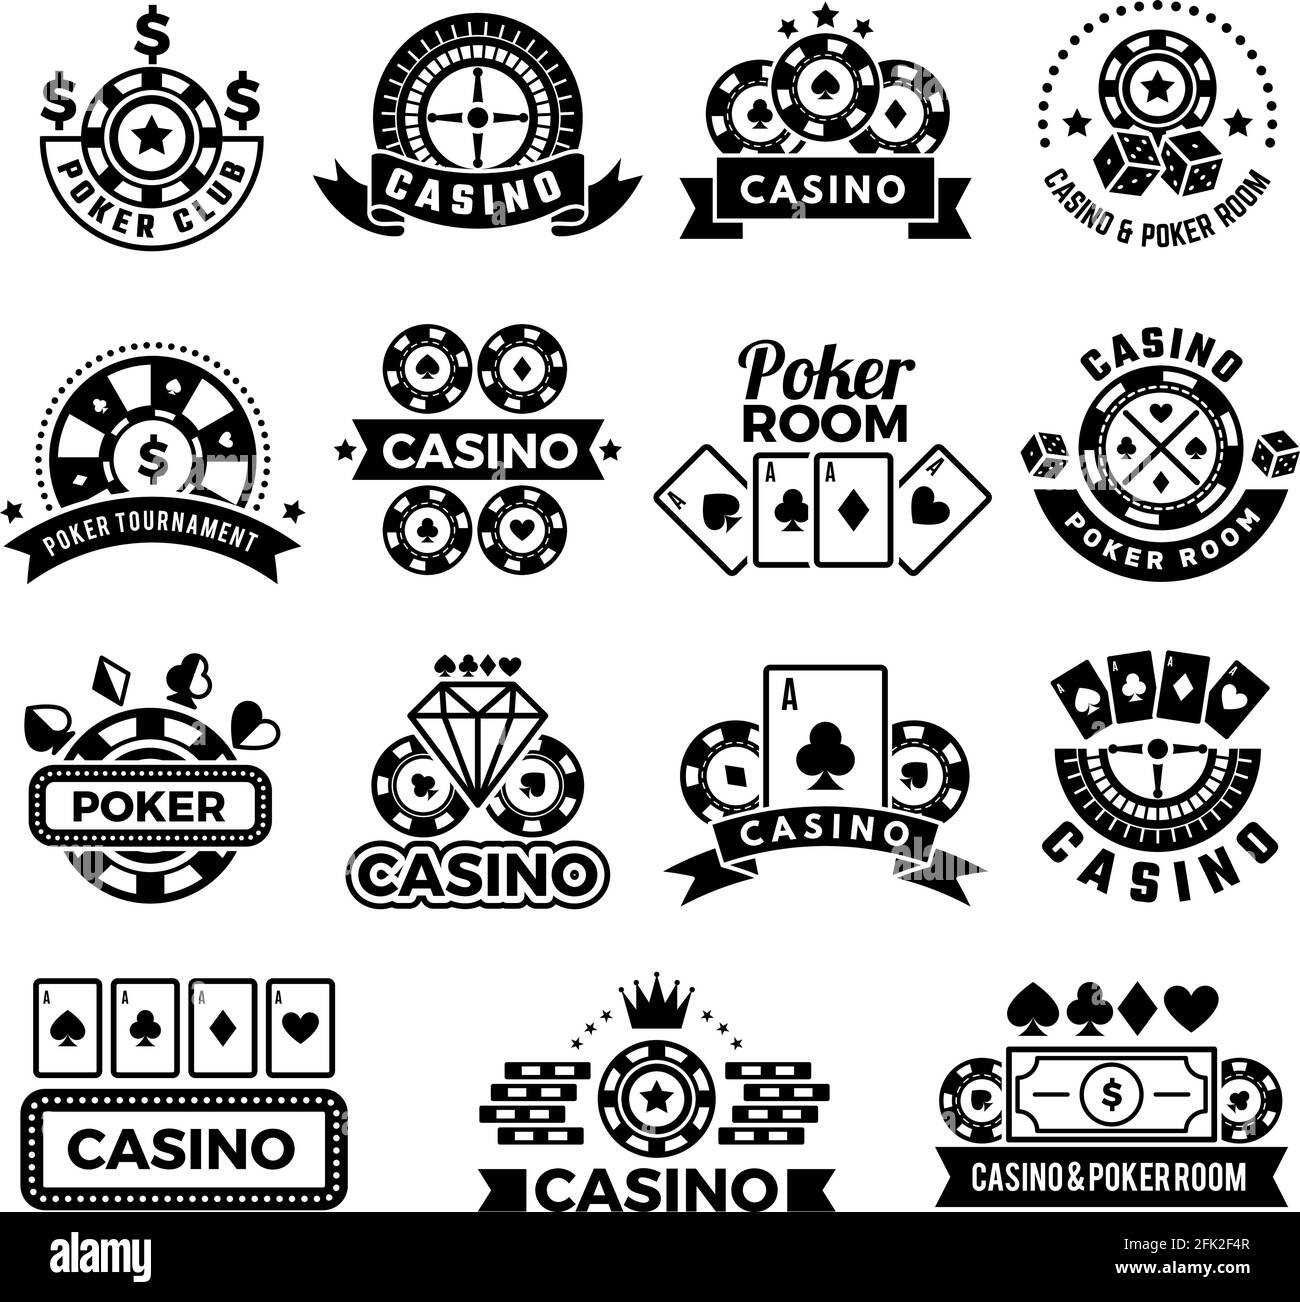 Casino emblems. Labels for poker club game tournament symbols gambling cards chips and dice vector collection Stock Vector